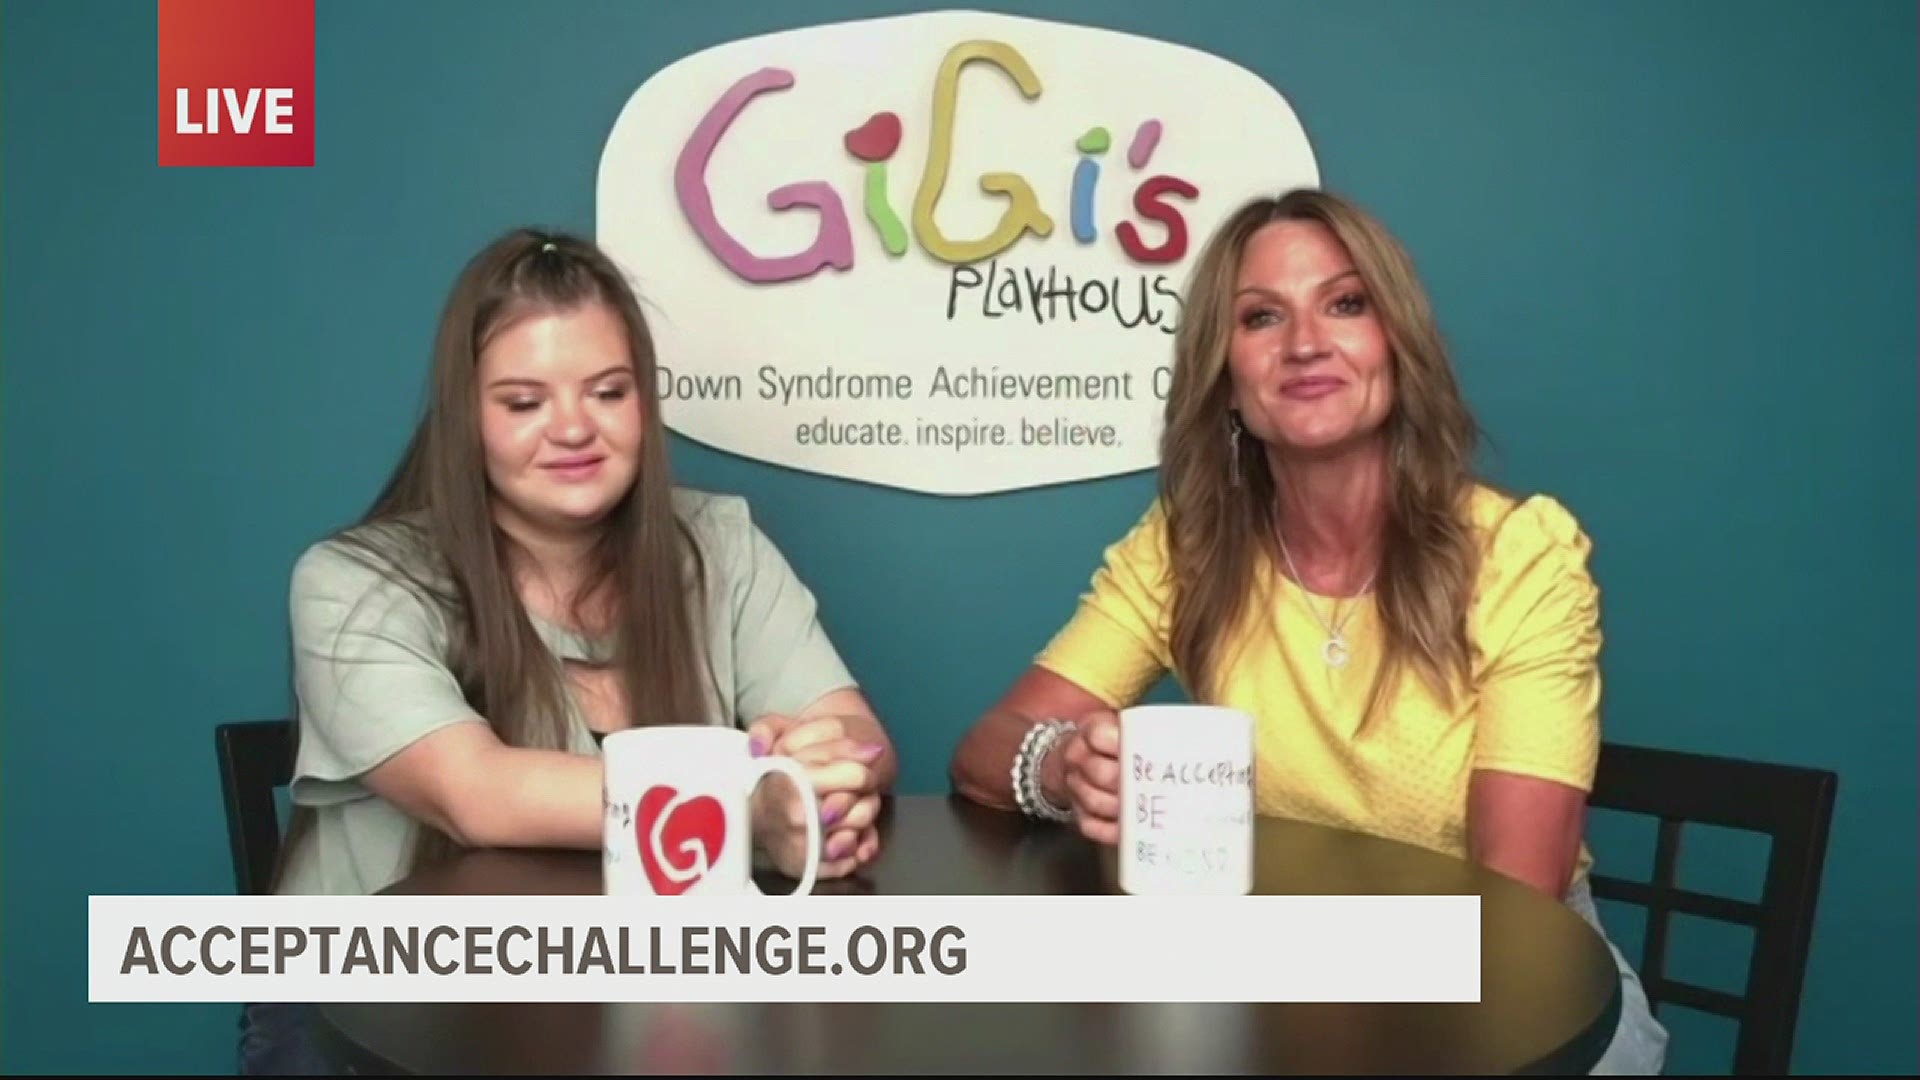 Gigi's Playhouse, an international network of Down Syndrome Achievement Centers, is encouraging participants to get out and move for global acceptance.